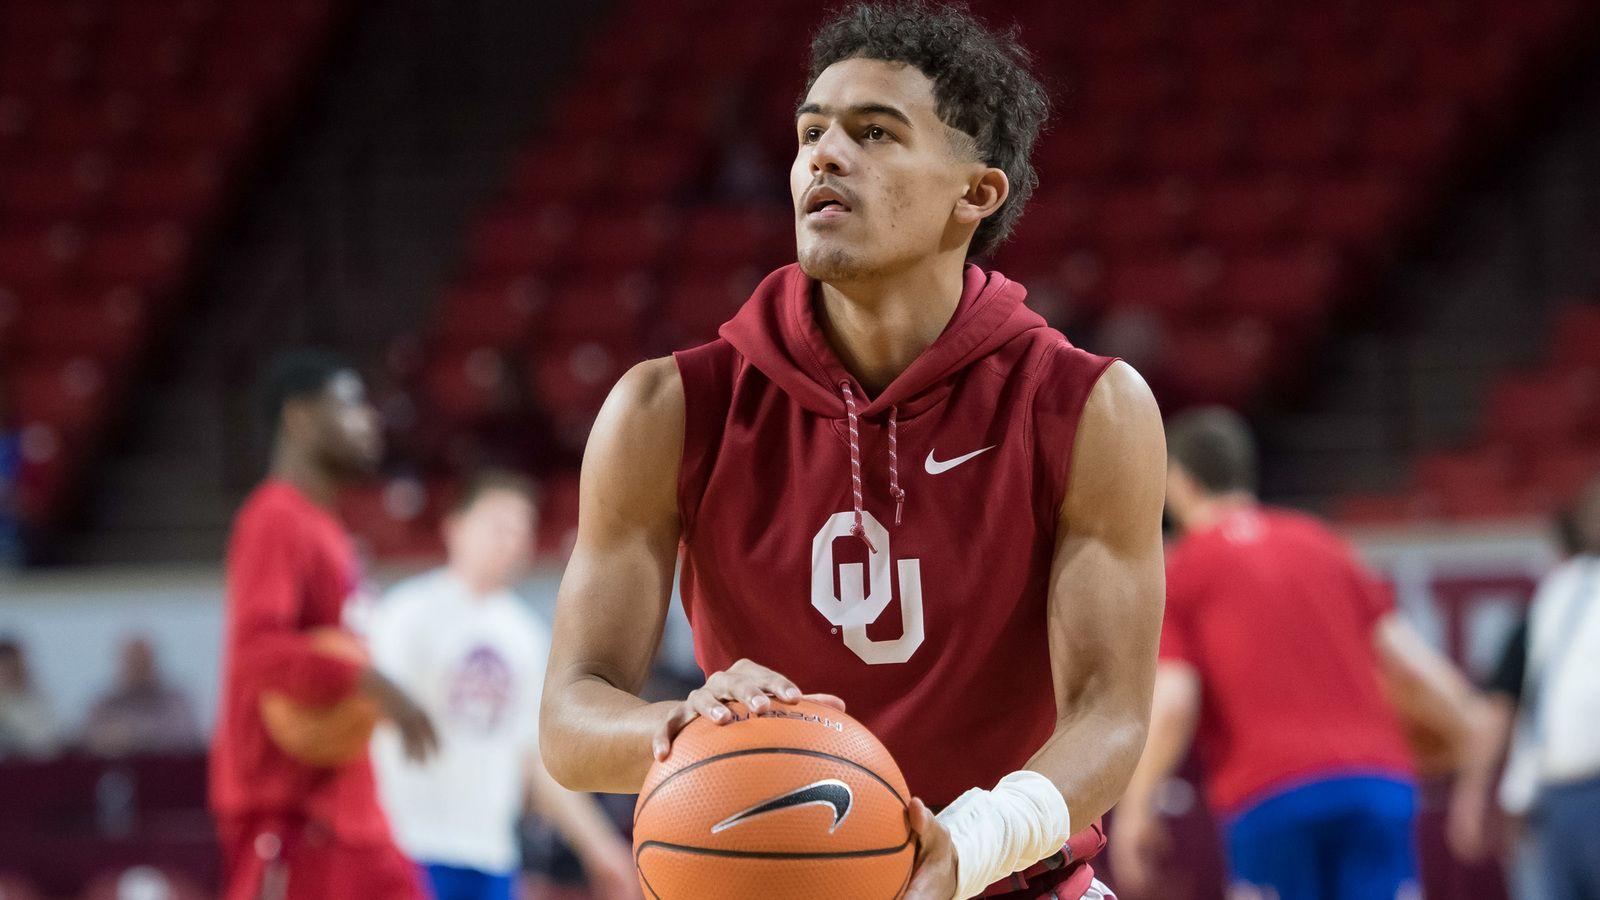 Hawks are reportedly interested in taking Trae Young, trading down